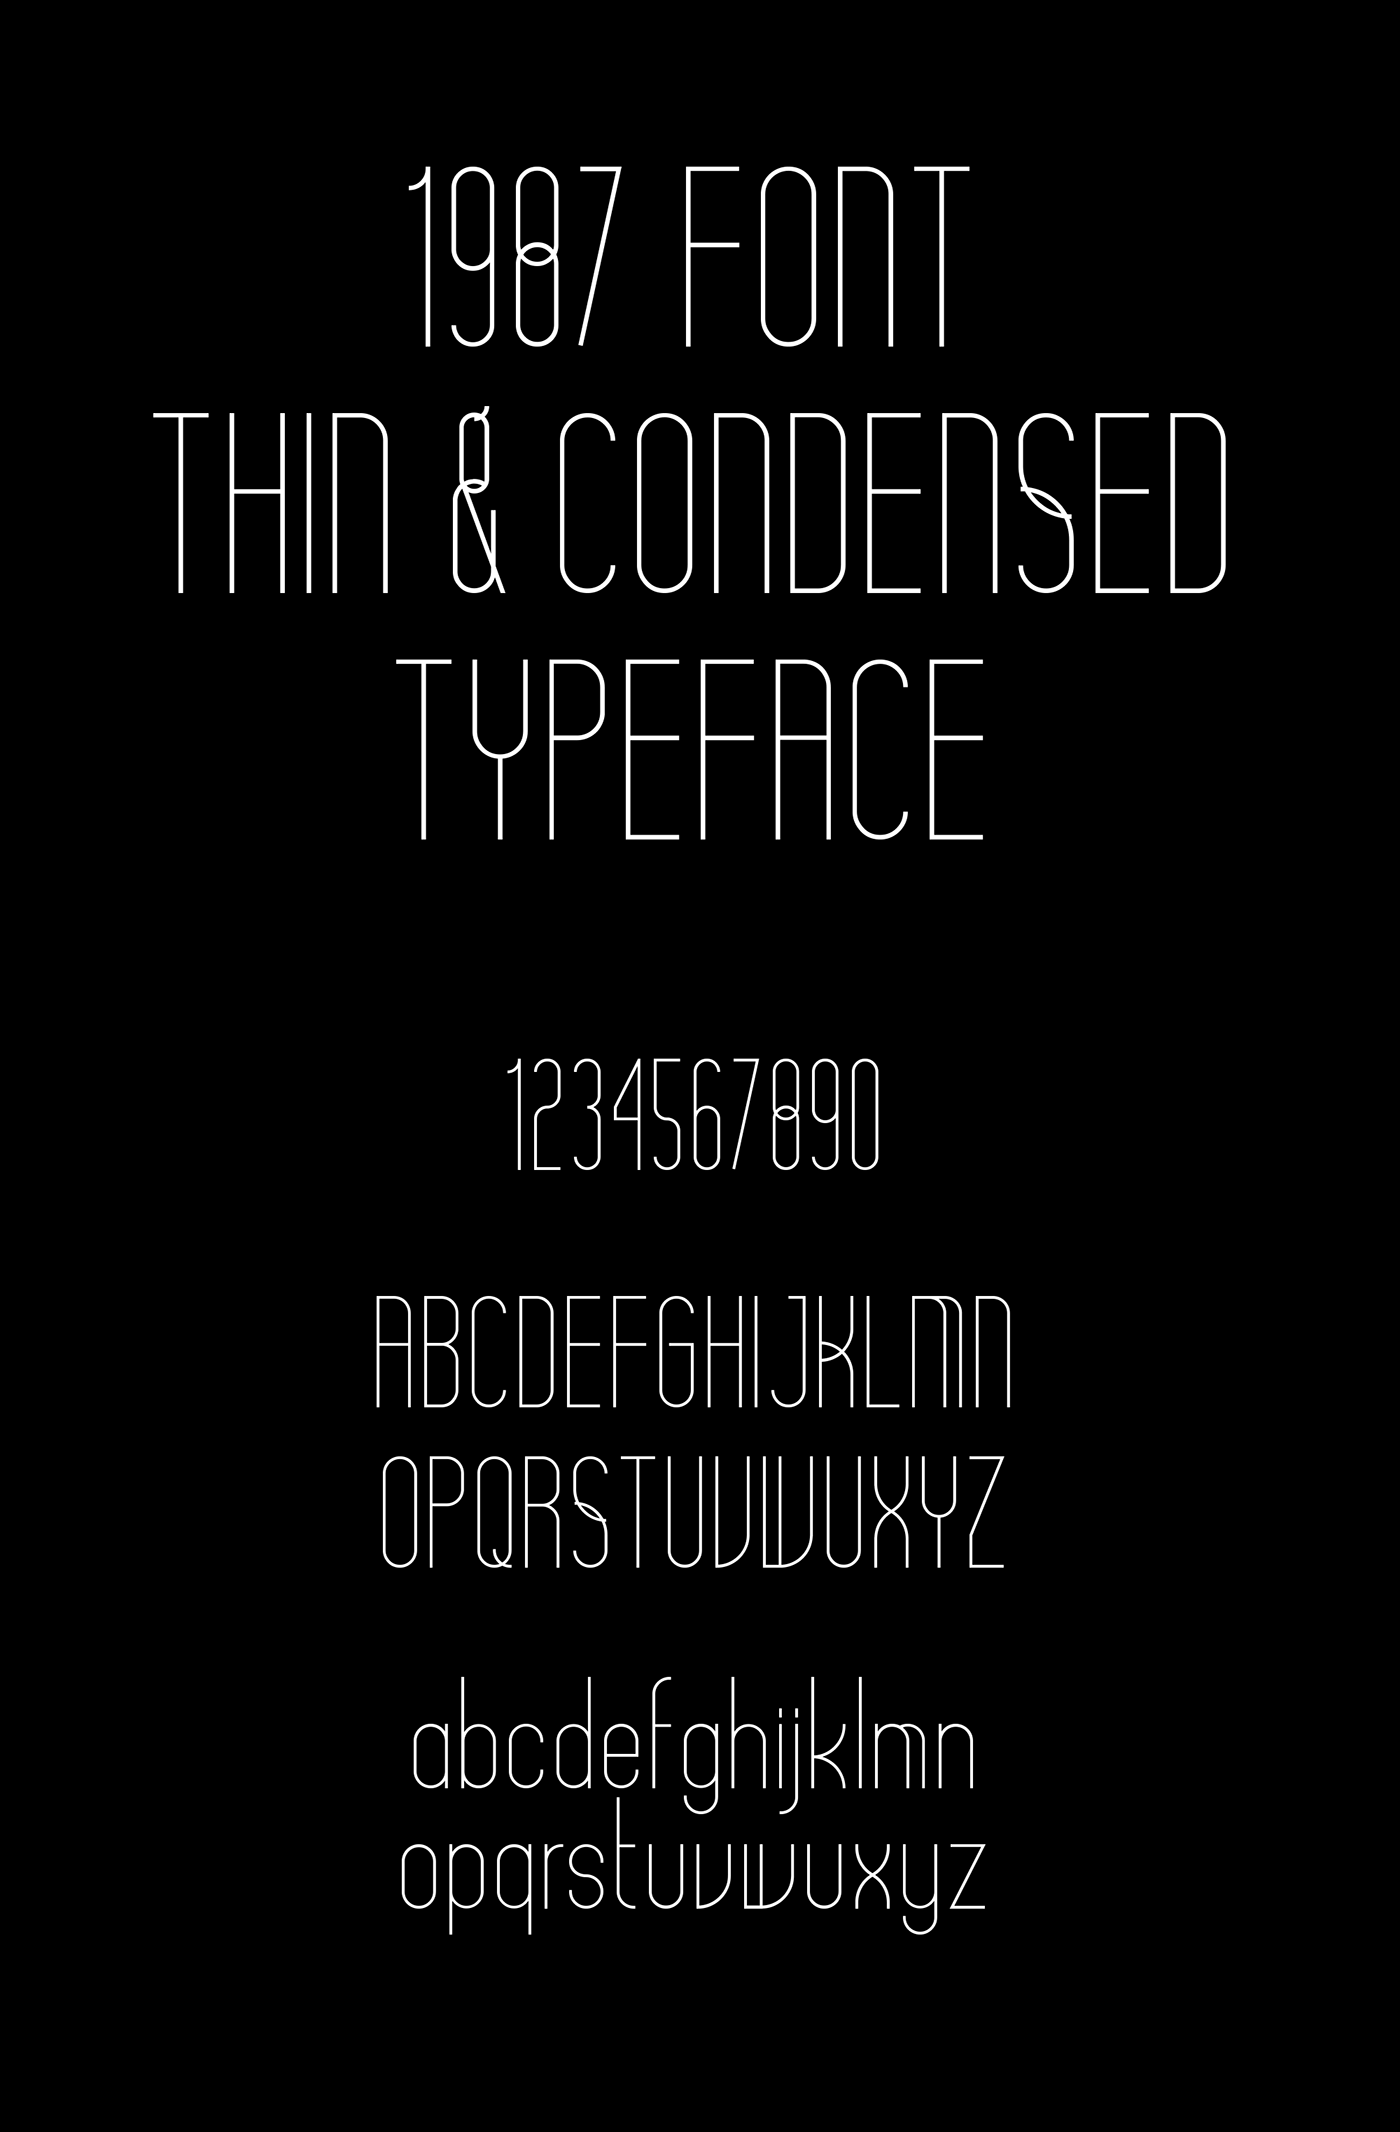 editorial typo font freefont Free font Typeface condensed thin 1980s